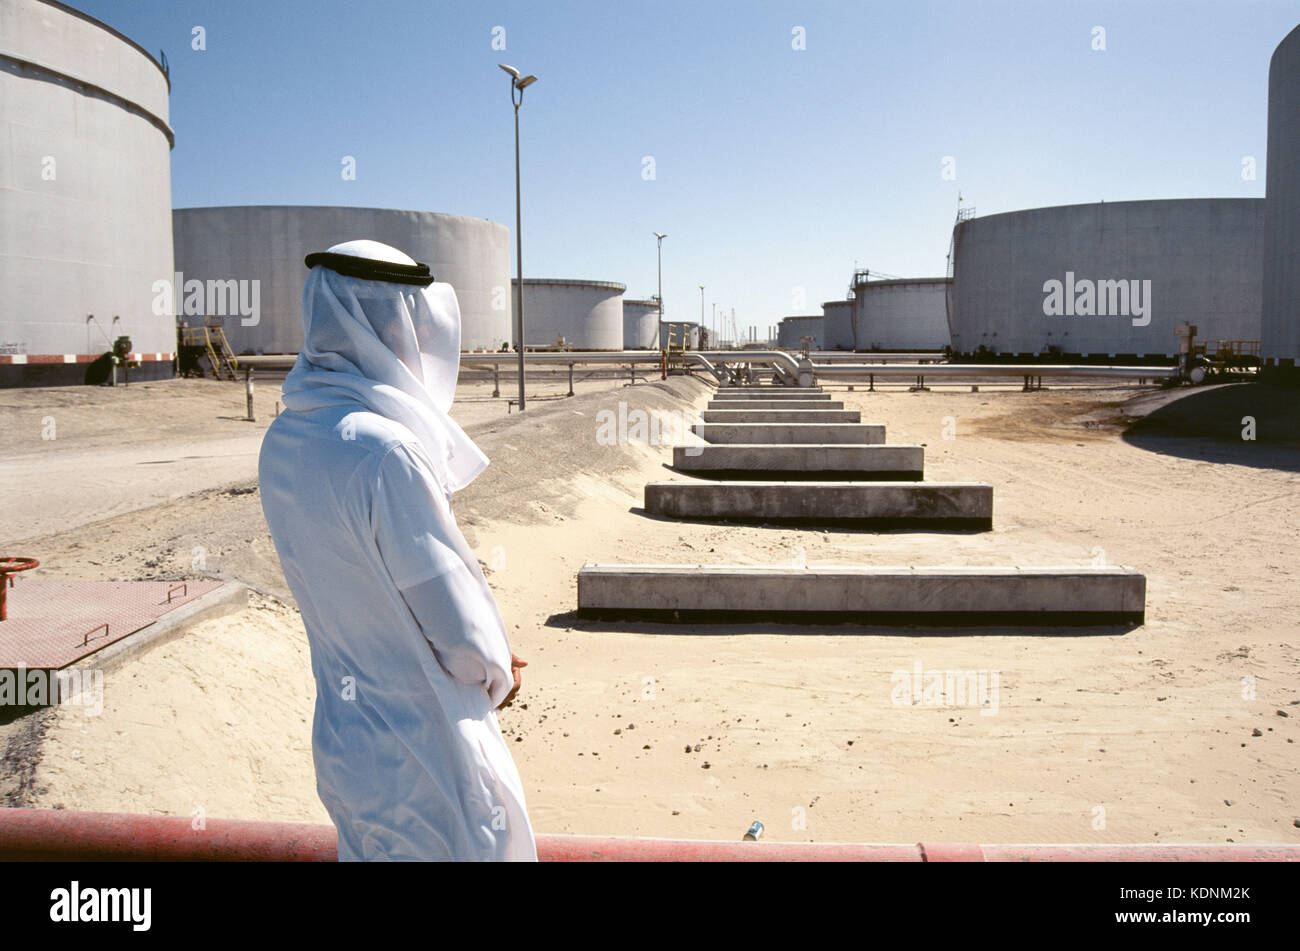 Ras Tanura, the largest oil refinery in the world, operated by Saudi Aramco, the largest oil  company in the world. Stock Photo